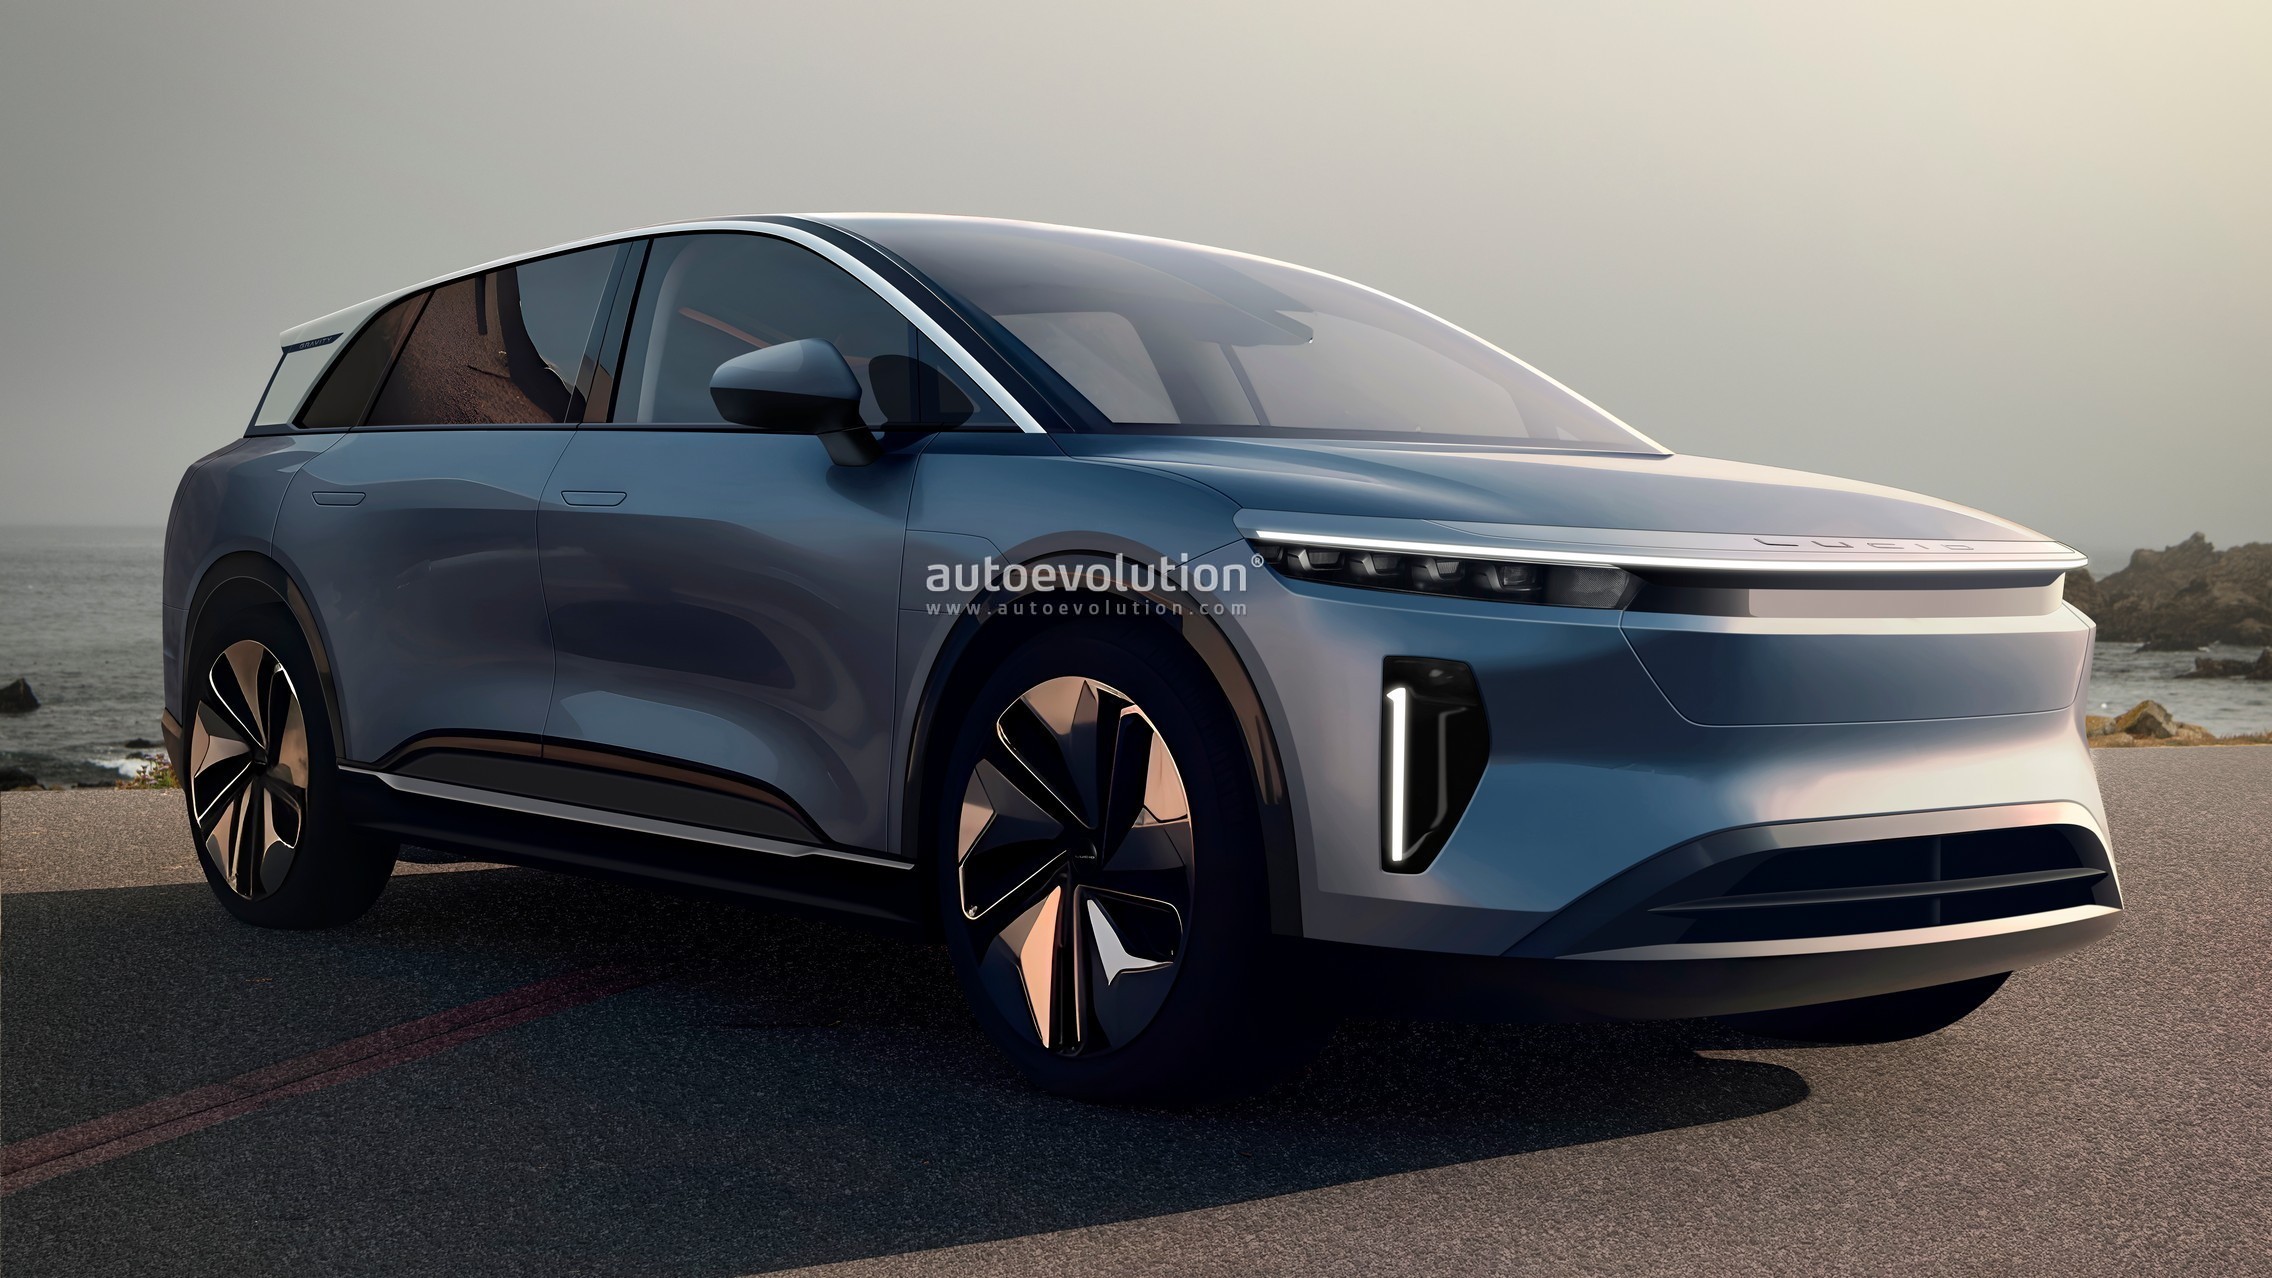 Lucid Gravity Electric SUV Hits The Road As Testing Phase Begins